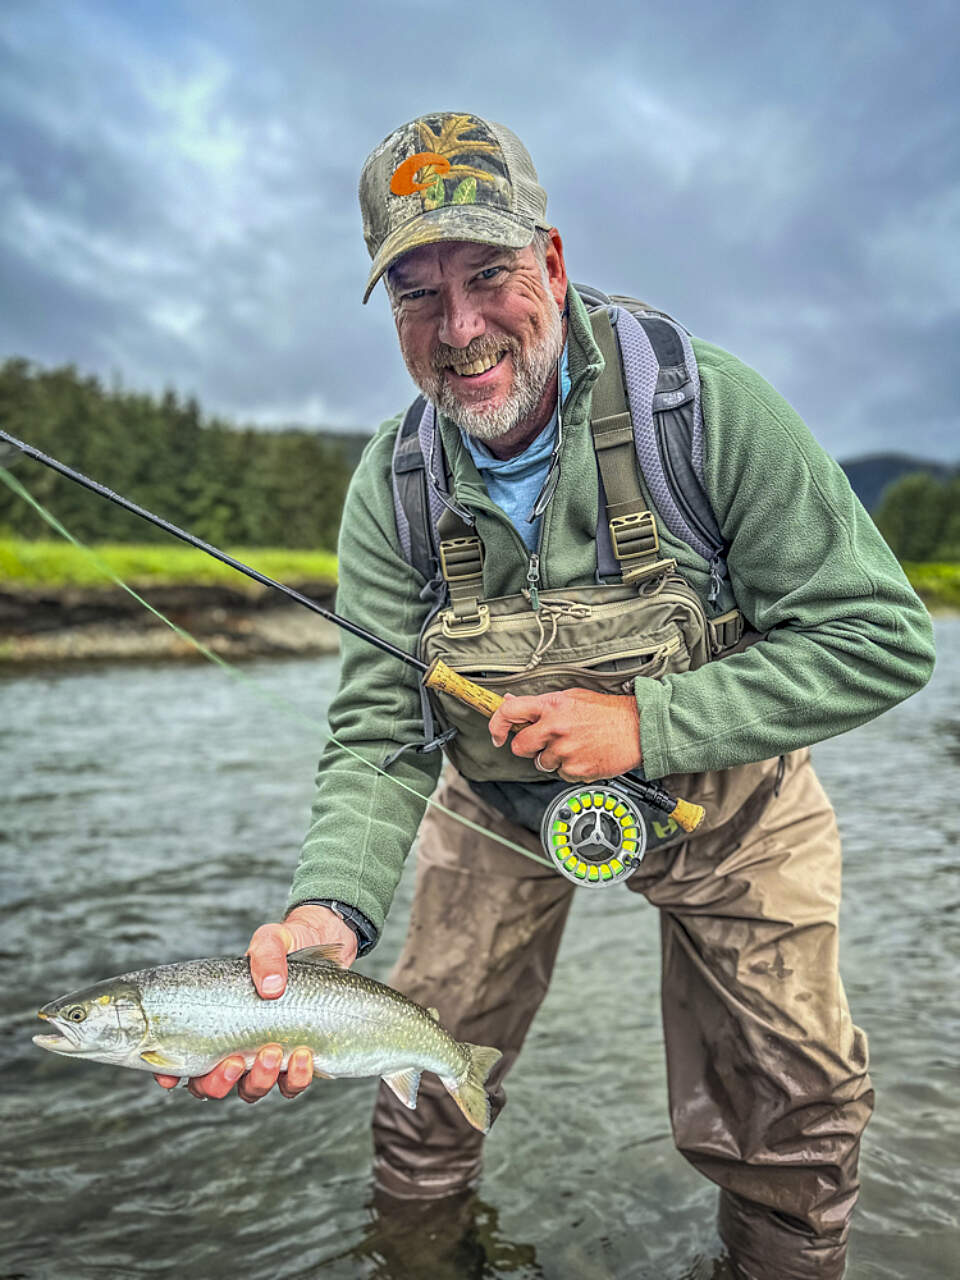 Fish for Alaska's famed salmon, char, and trout with expert guidance